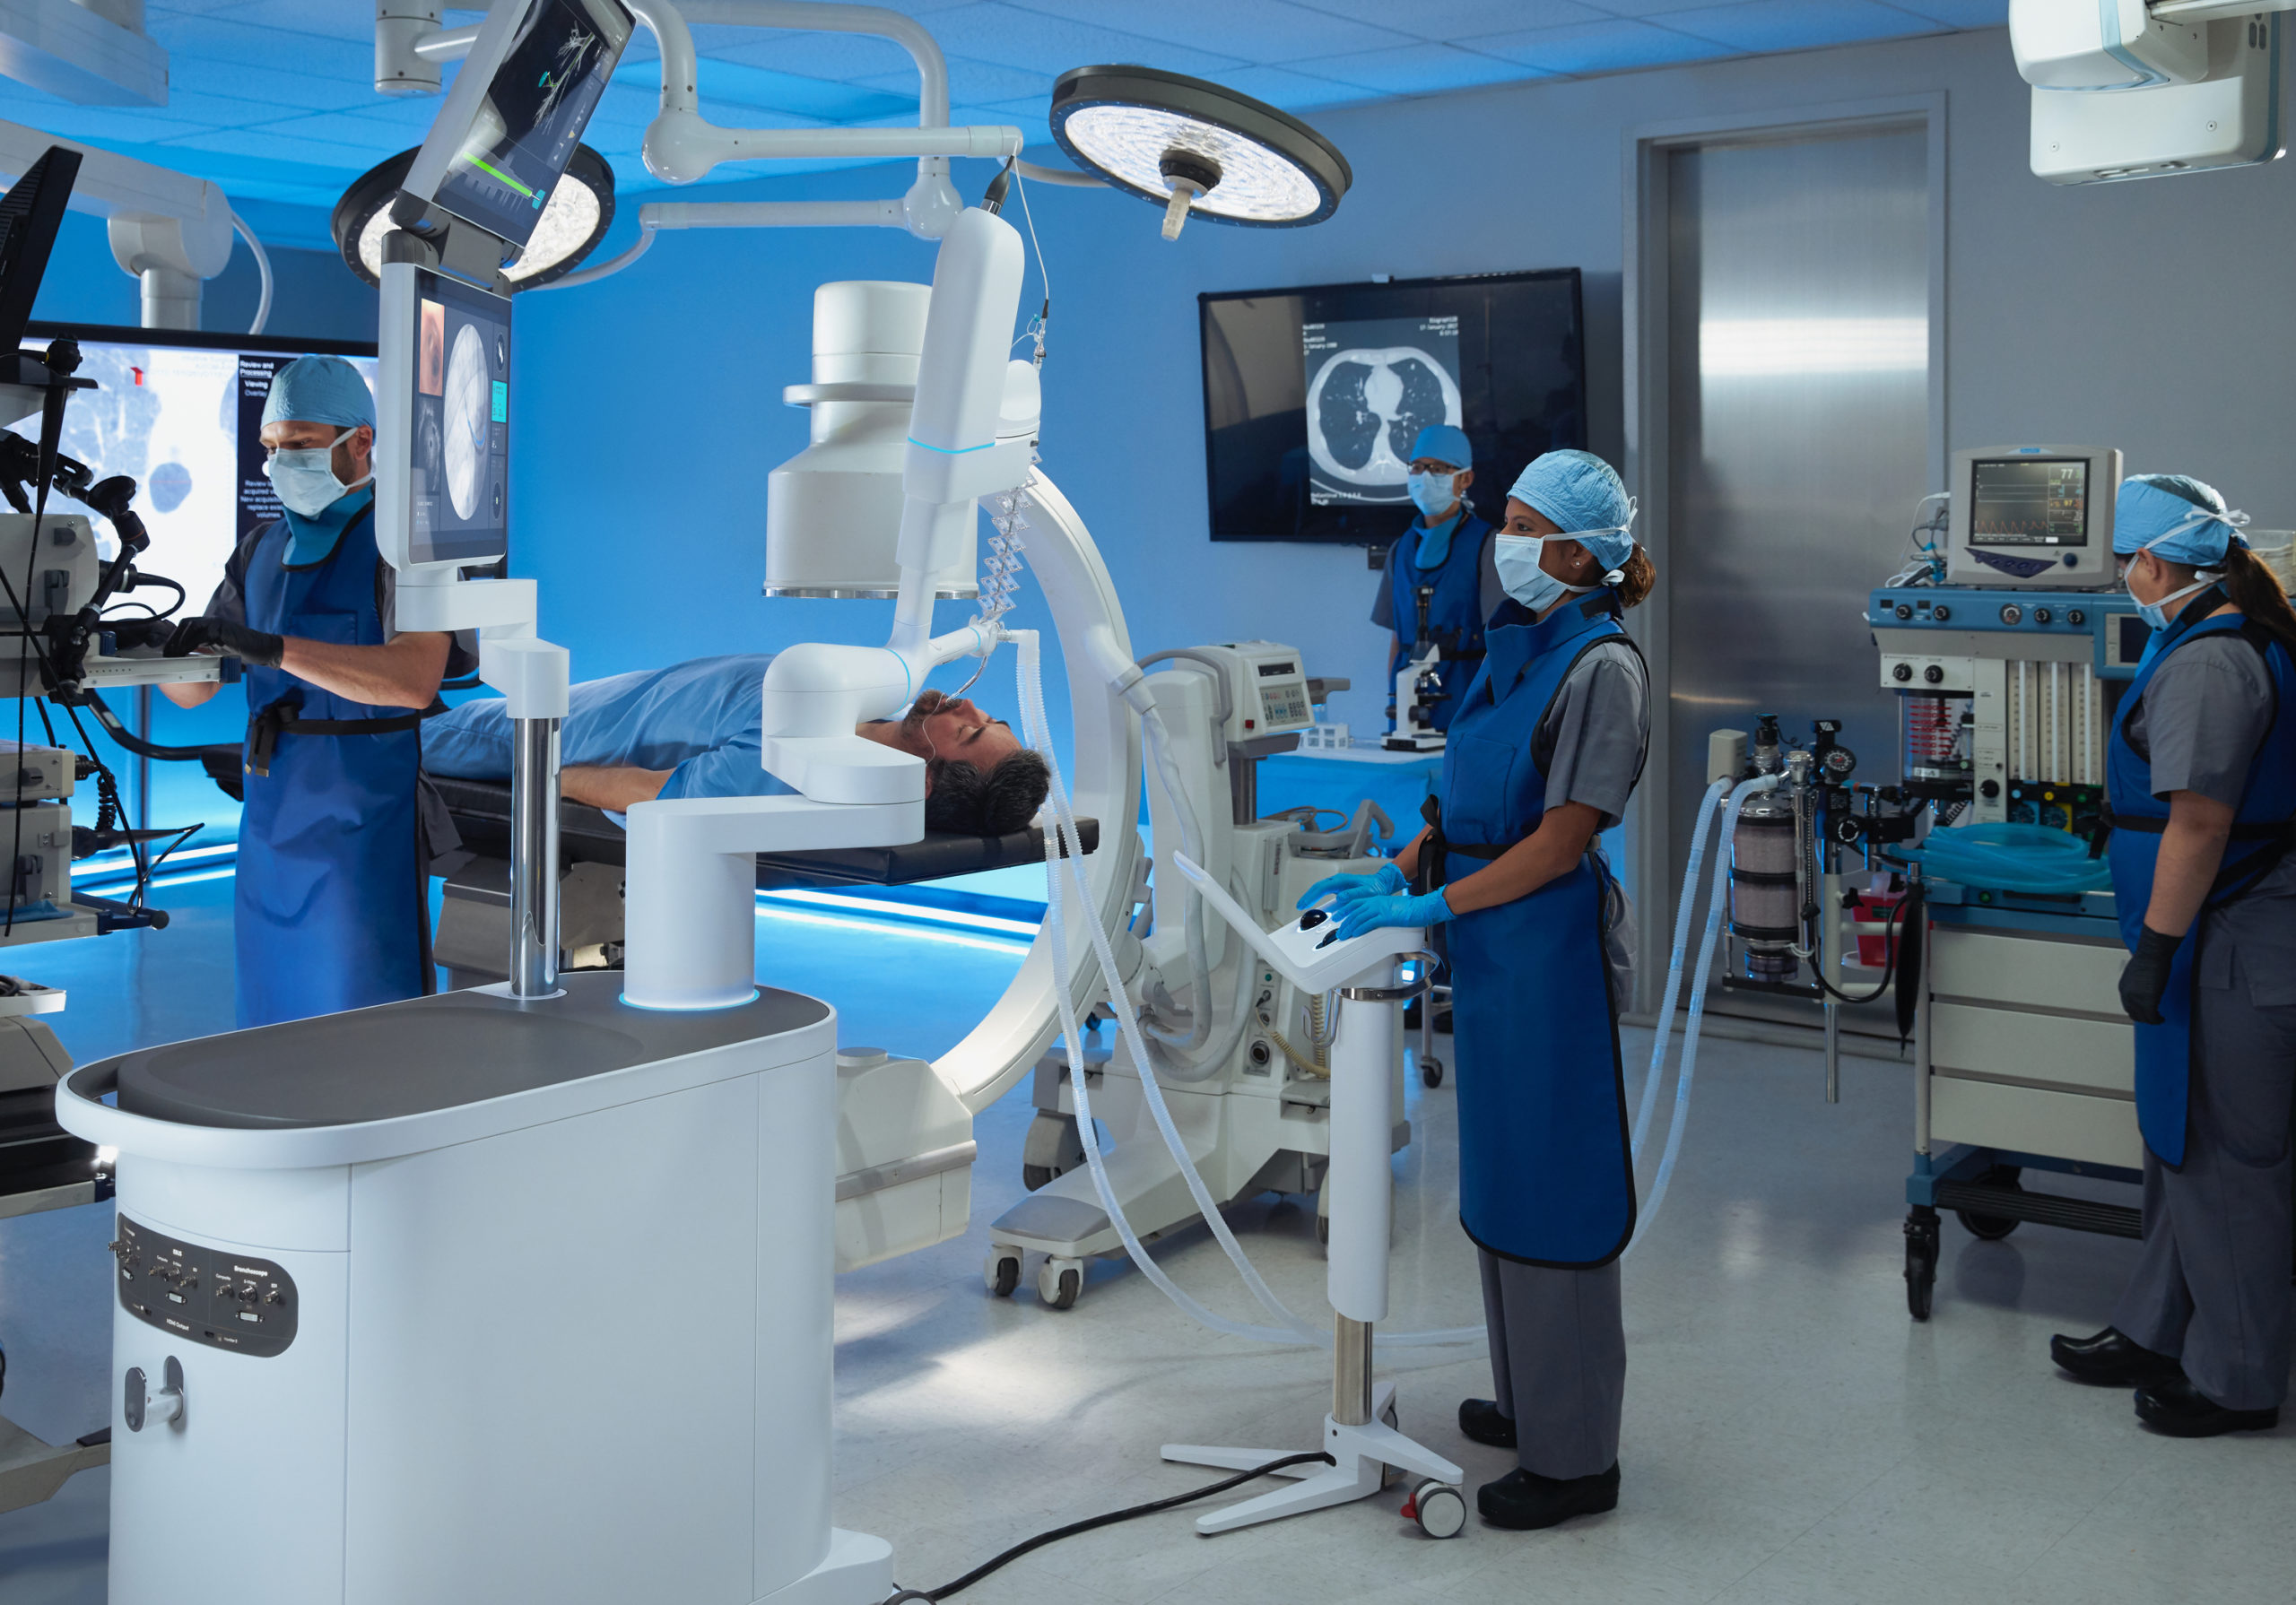 Featured image for “Fort Sanders Regional Medical Center to Perform Robotic-Assisted Lung Biopsies”